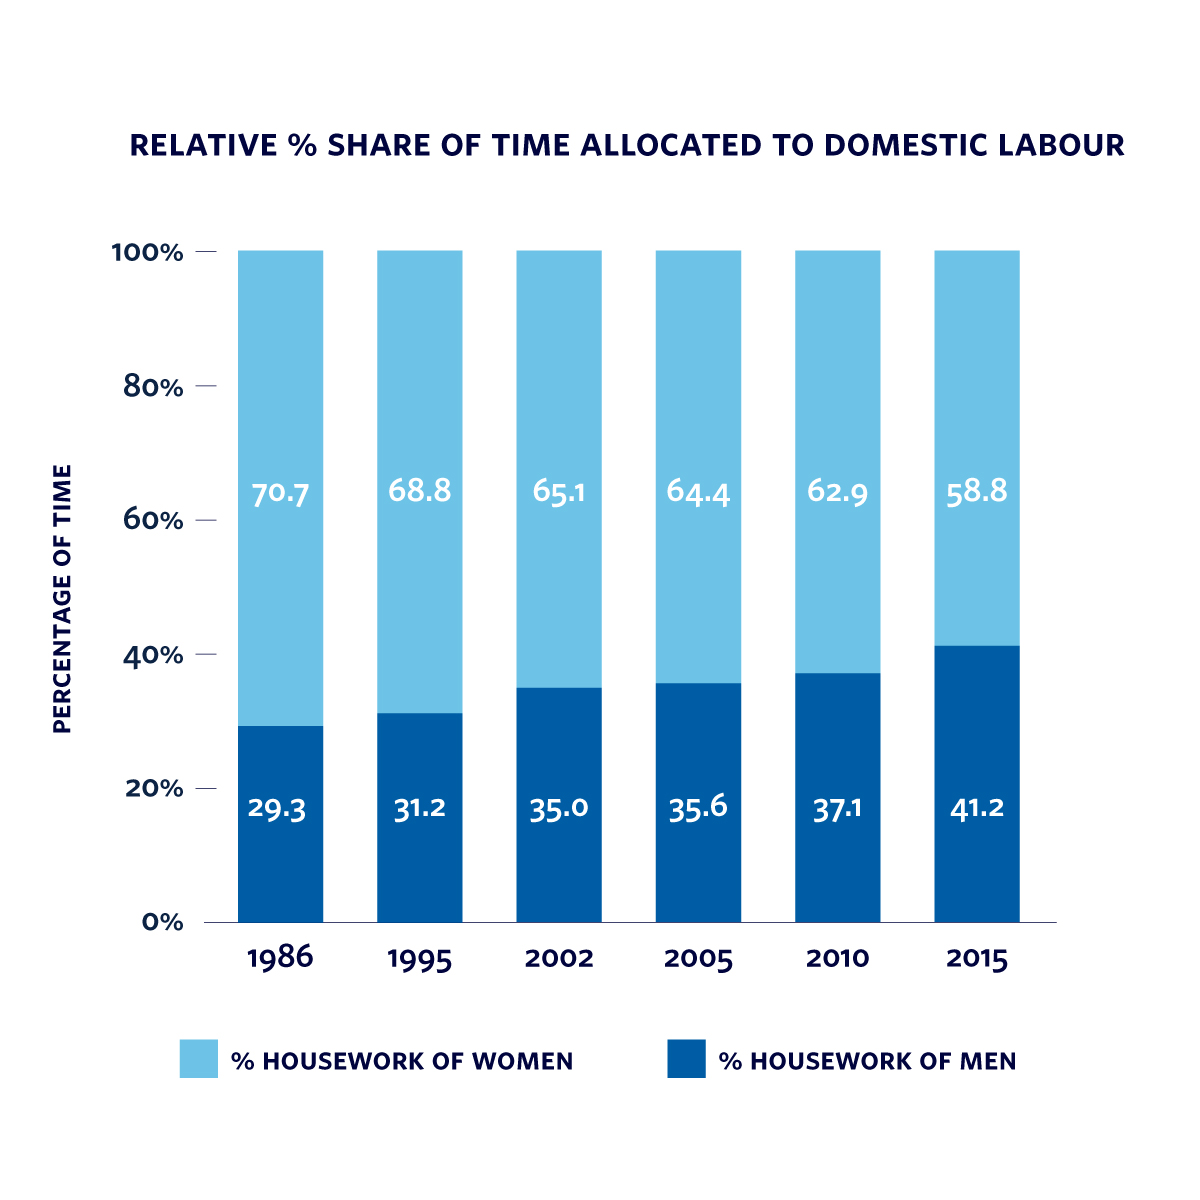 Relative percentage share of time allocated to domestic labour